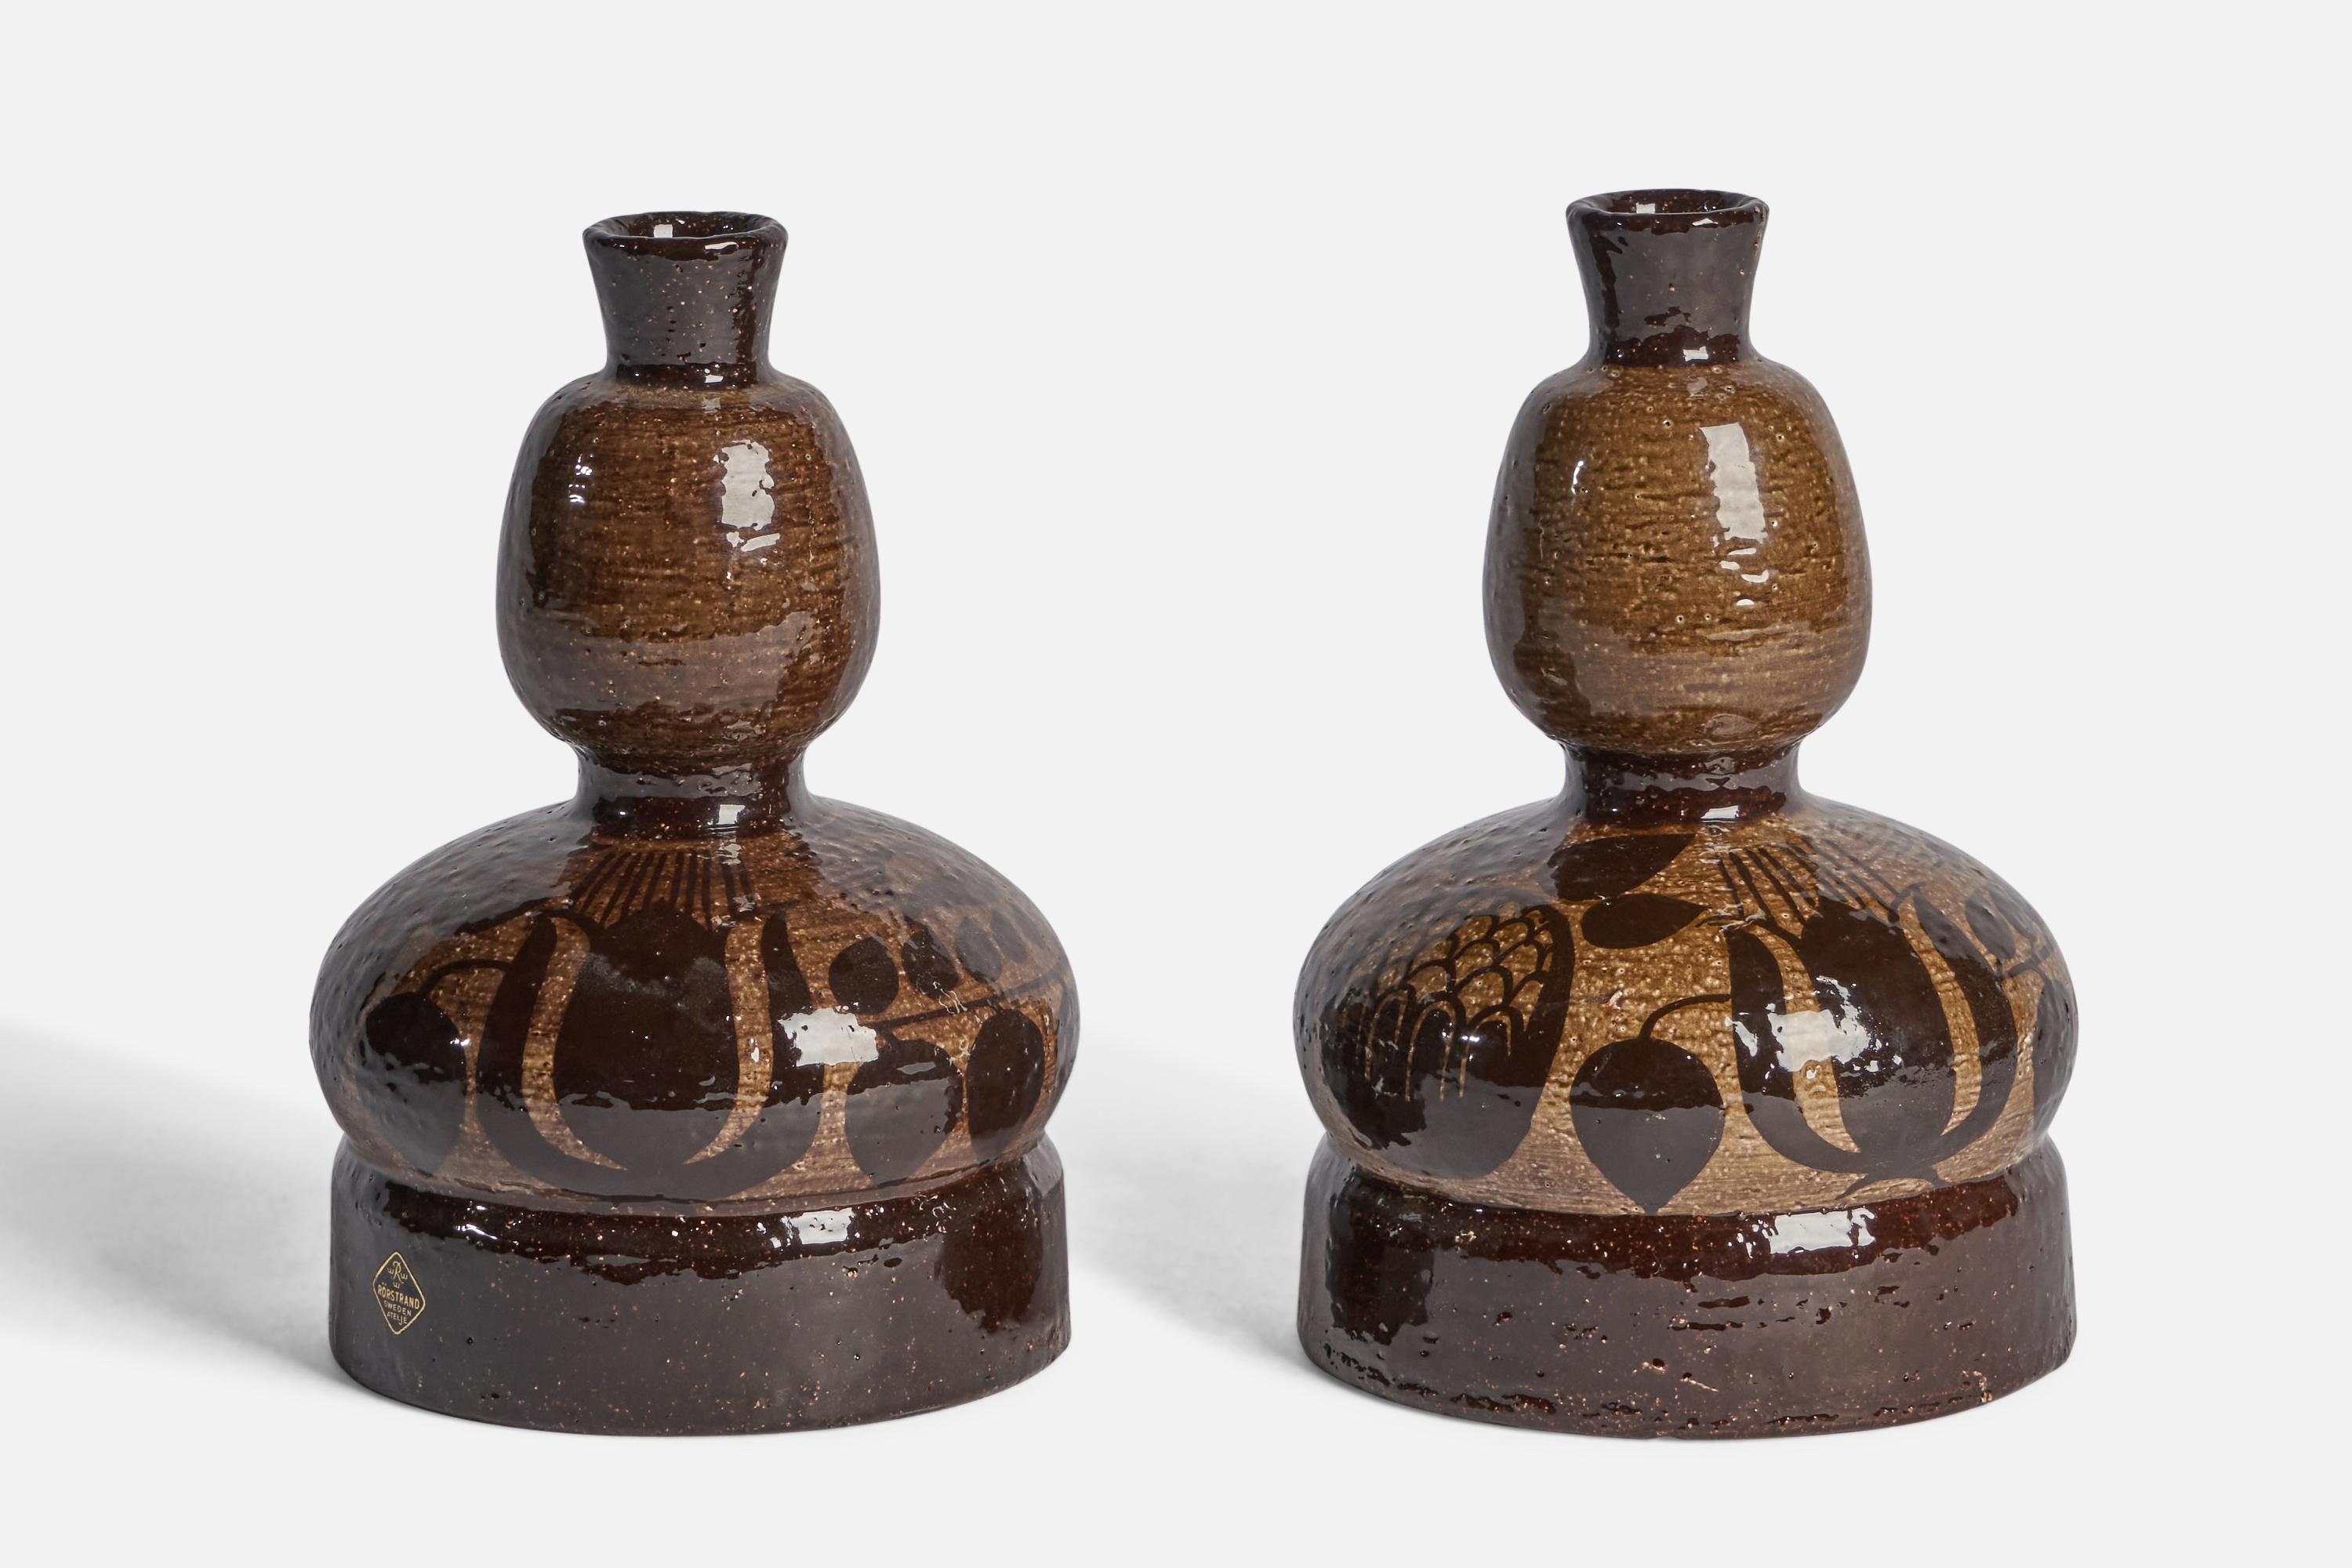 A pair of brown-glazed and painted stoneware vases designed by Olle Alberius and produced by Rörstrand, Sweden, c. 1950s.

“Rörstrand Sweden” stamp. “OA ATELJE SWEDEN” on bottom